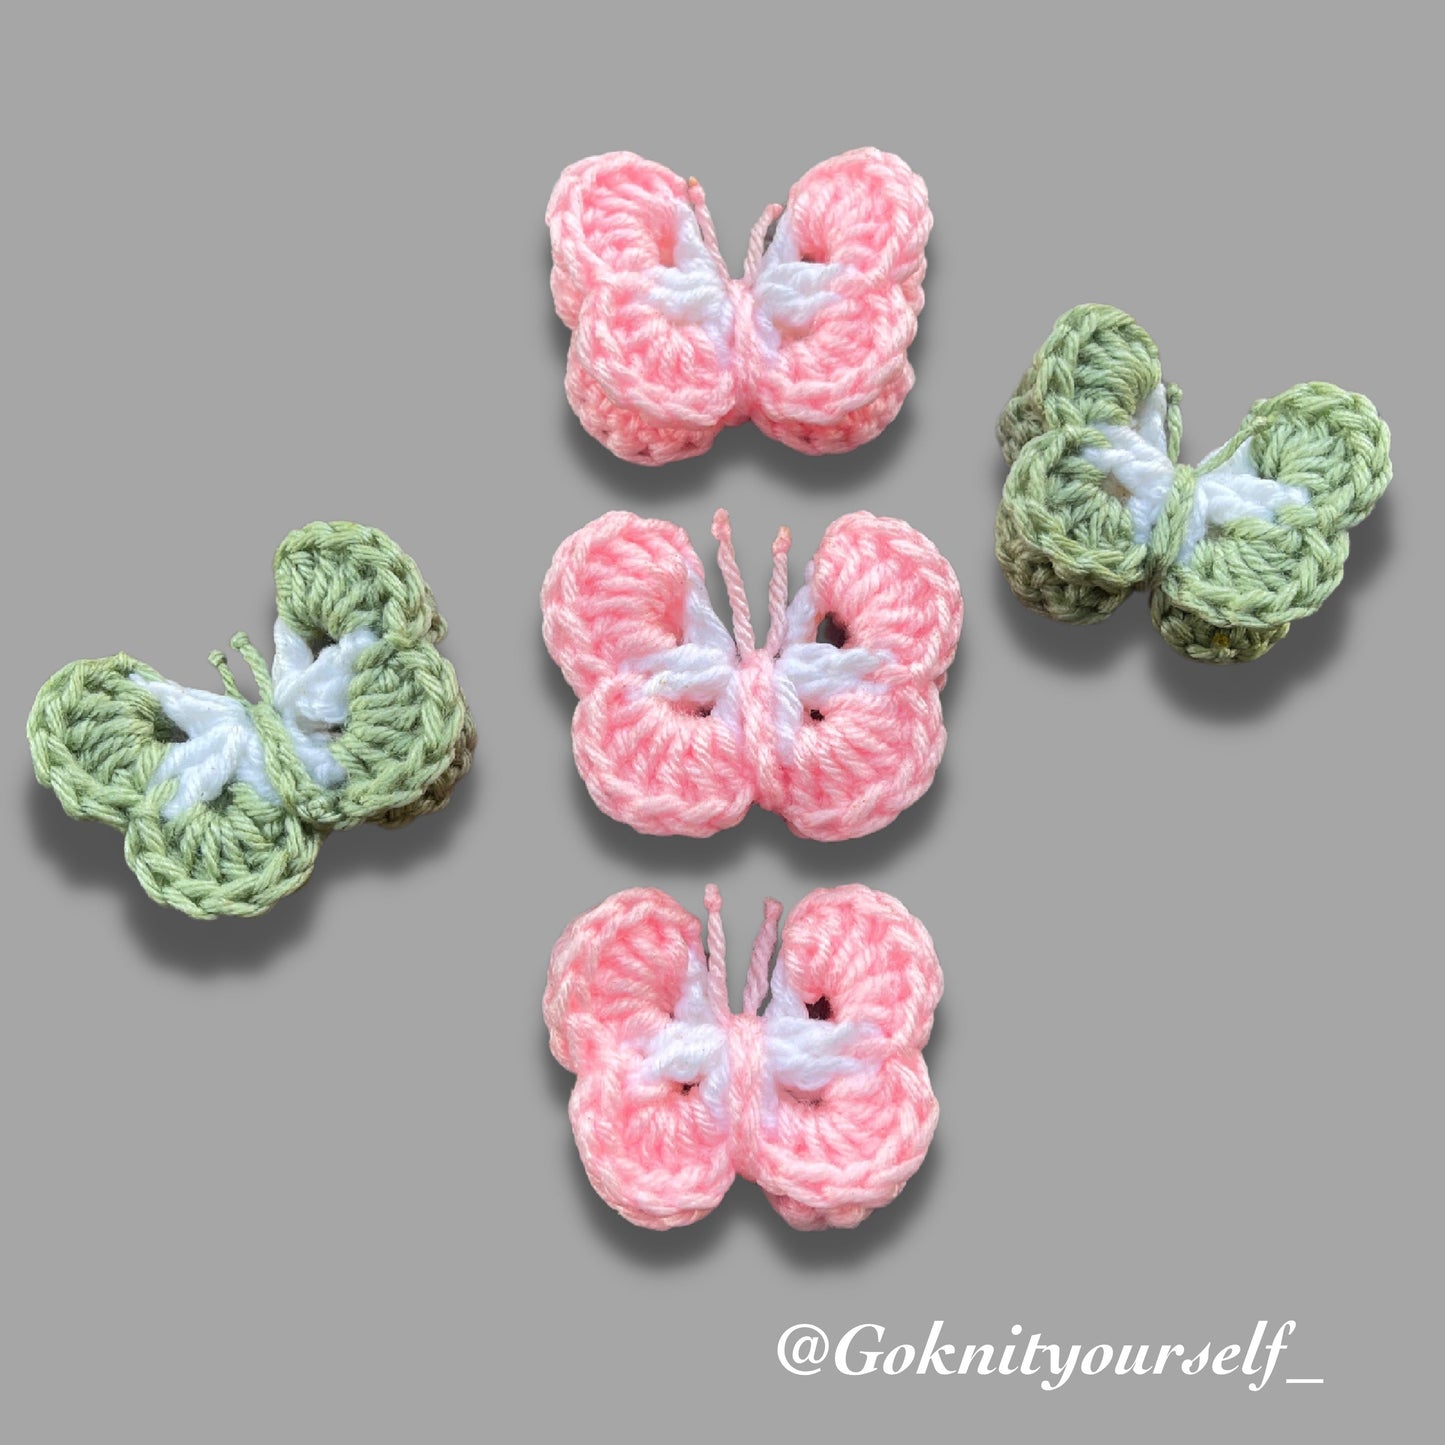 Gender Reveal Butterfly’s - Party decor, guest keepsakes, gender reveal butterfly - any color